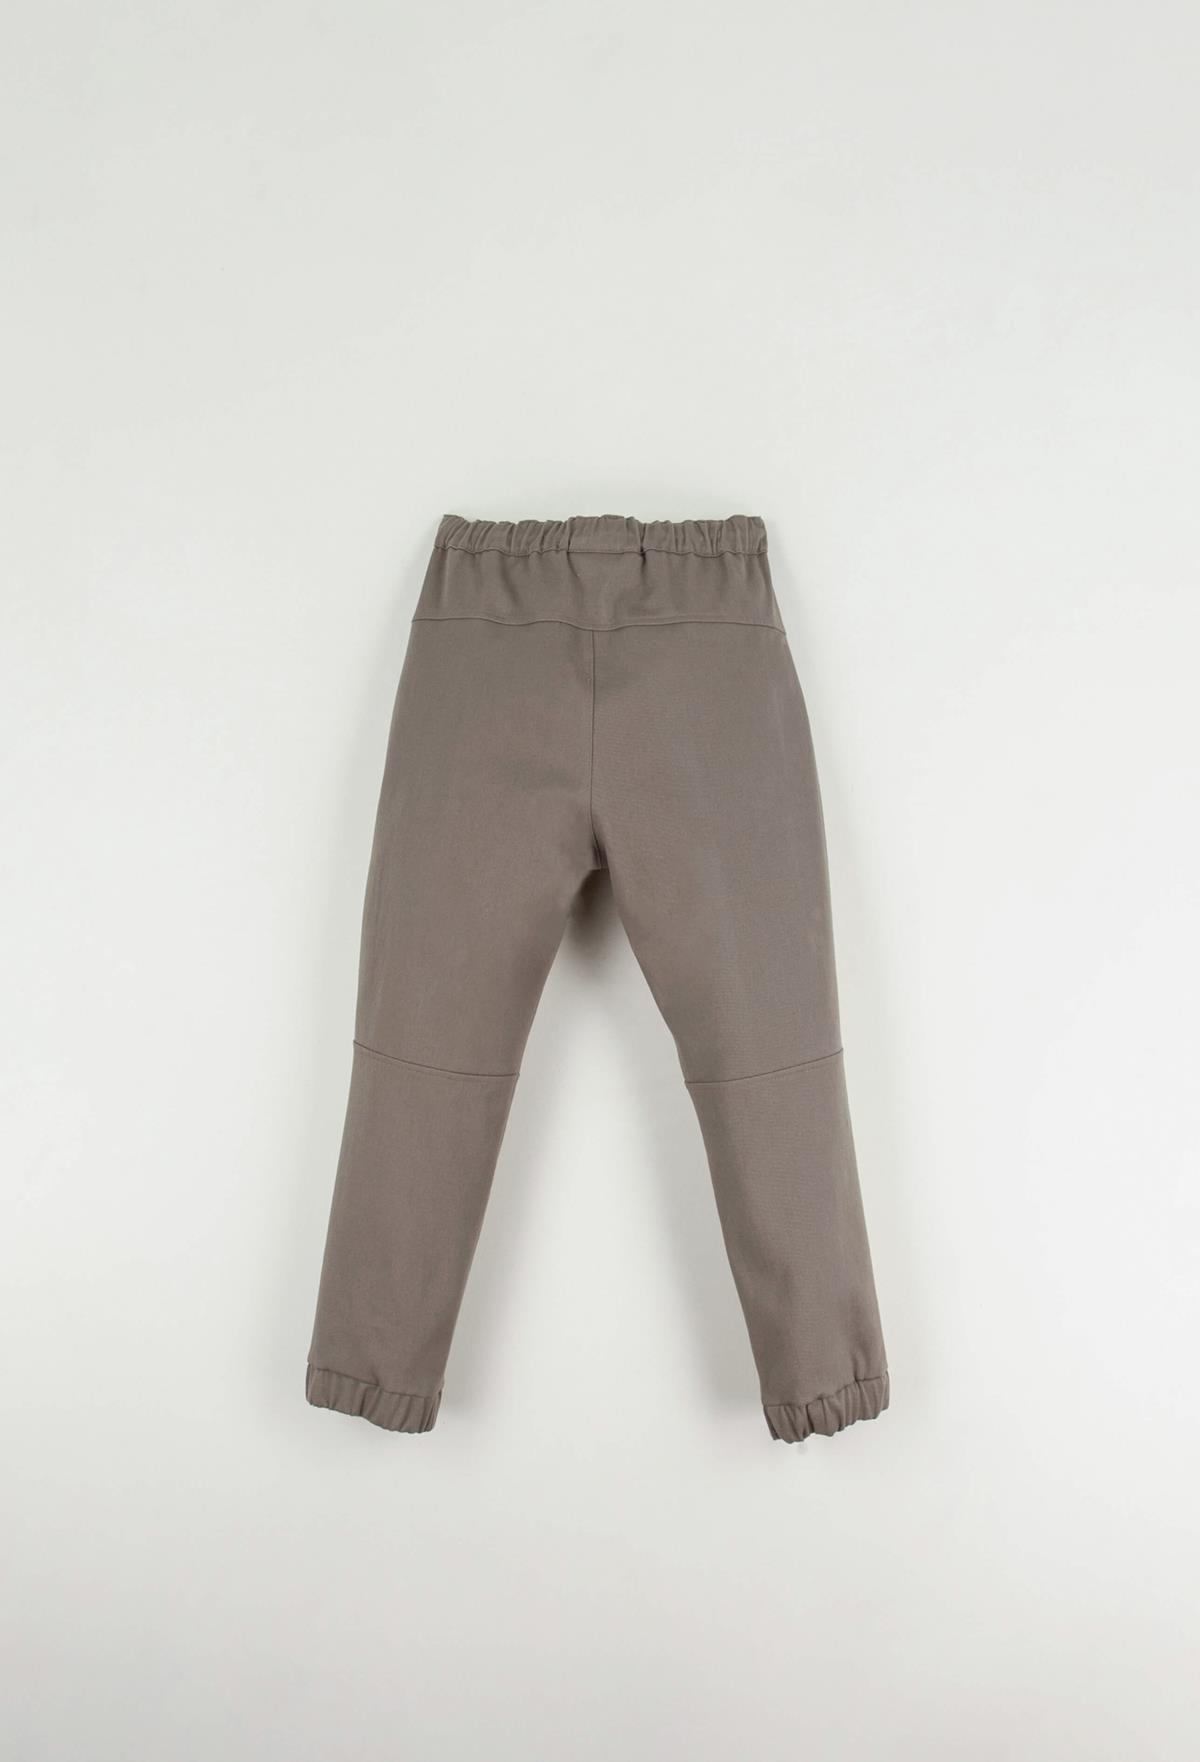 Mod.22.1 Taupe jogger trousers with pockets | AW22.23 Mod.22.1 Taupe jogger trousers with pockets